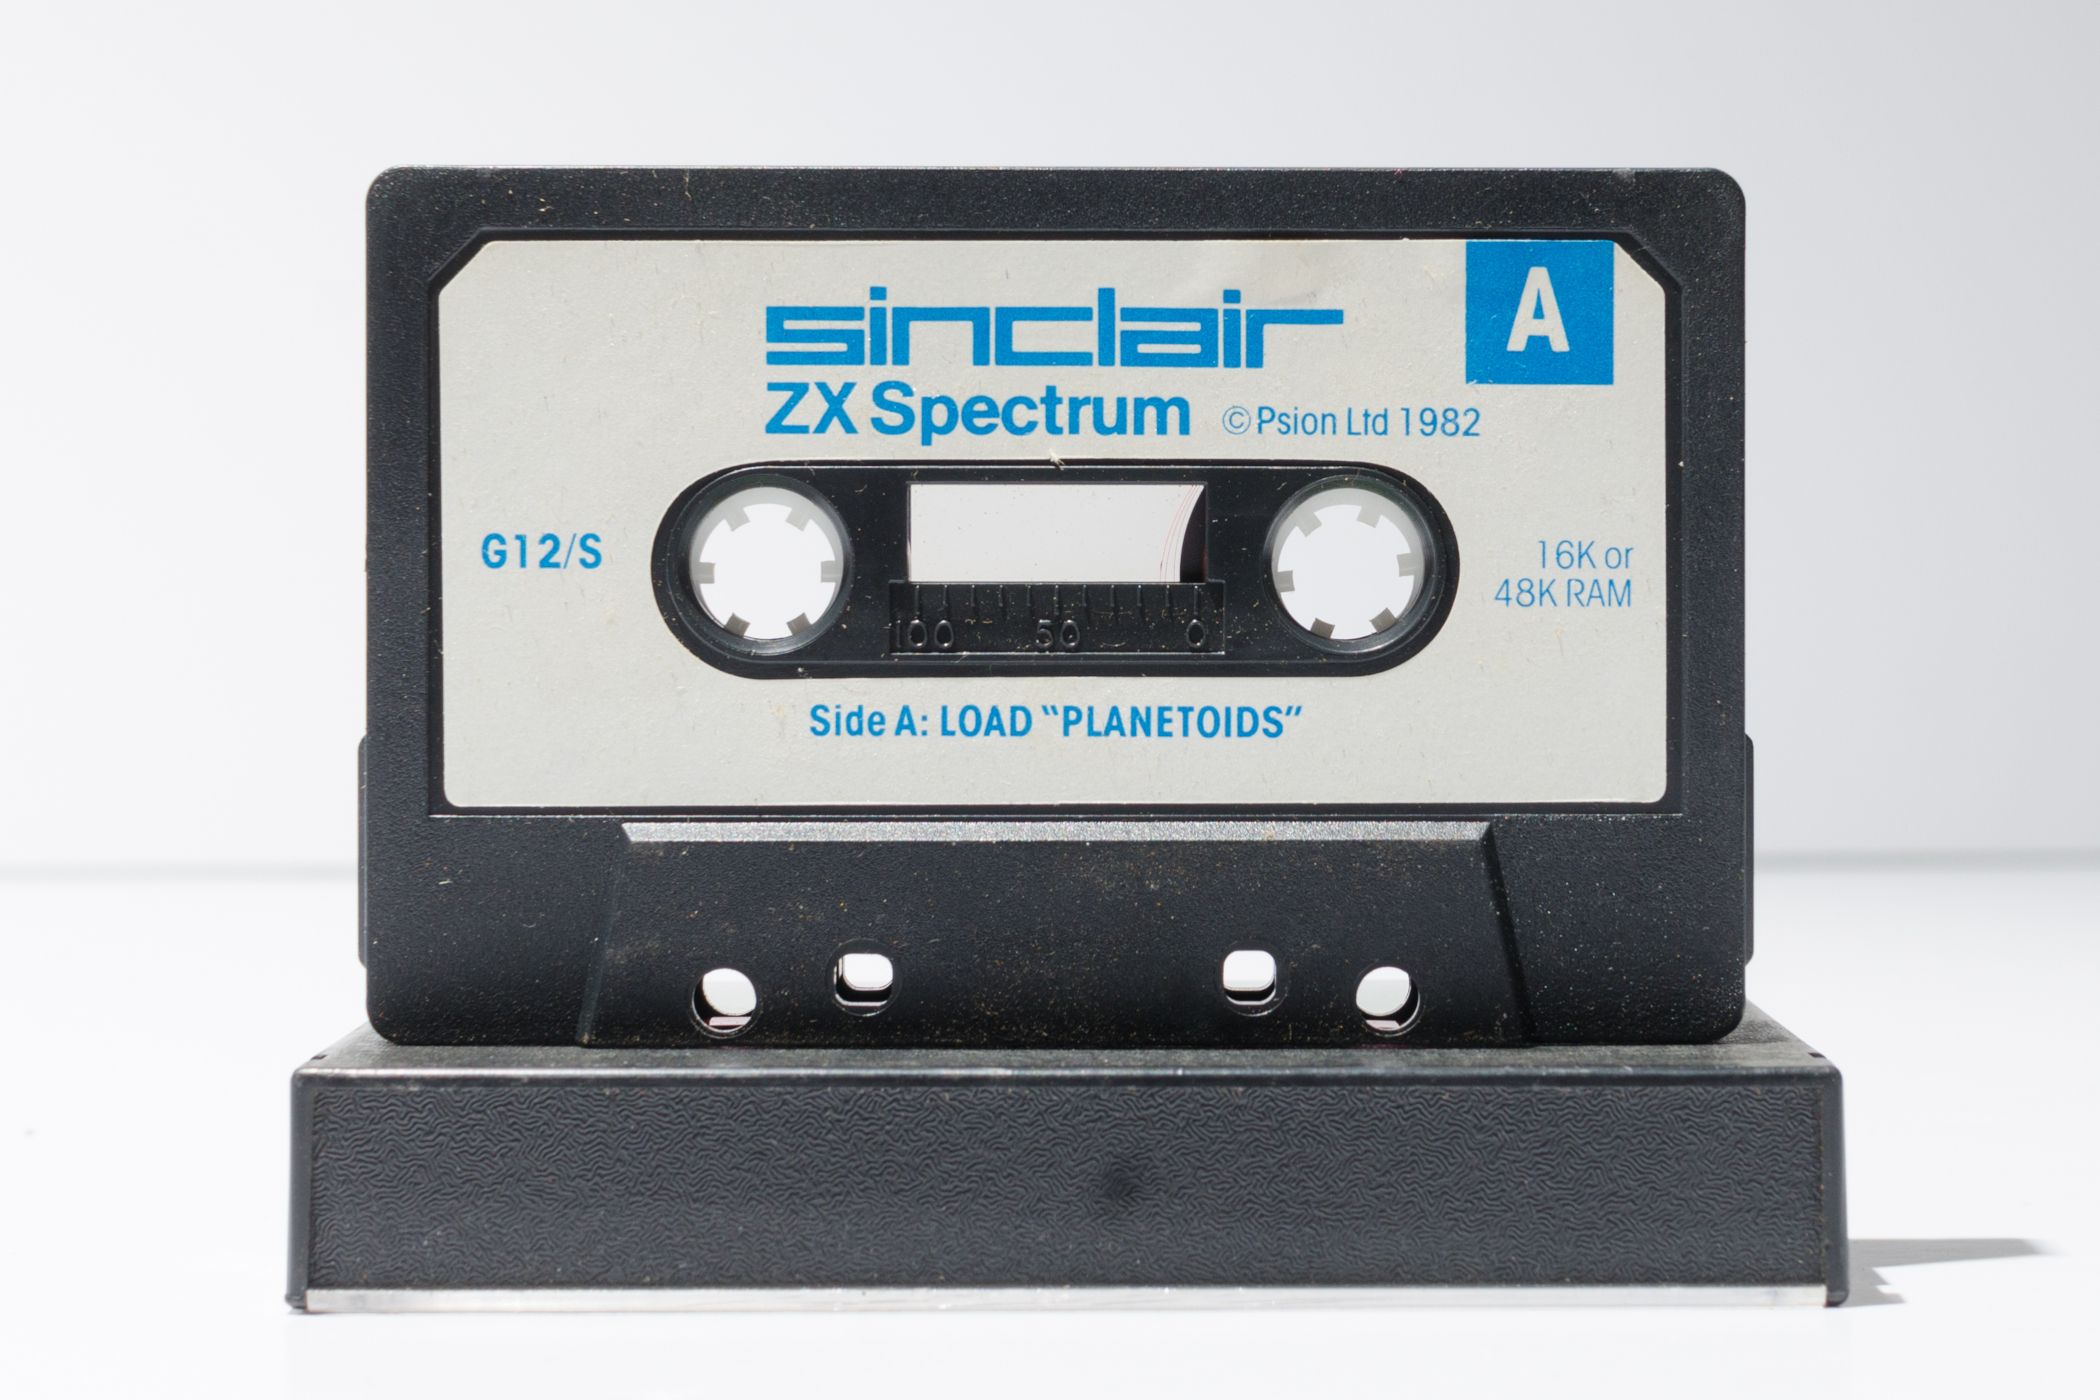 Retro vintage Spectrum Sinclair 48k arcade video game classic, Planetoids and Missile software, in cassette format.